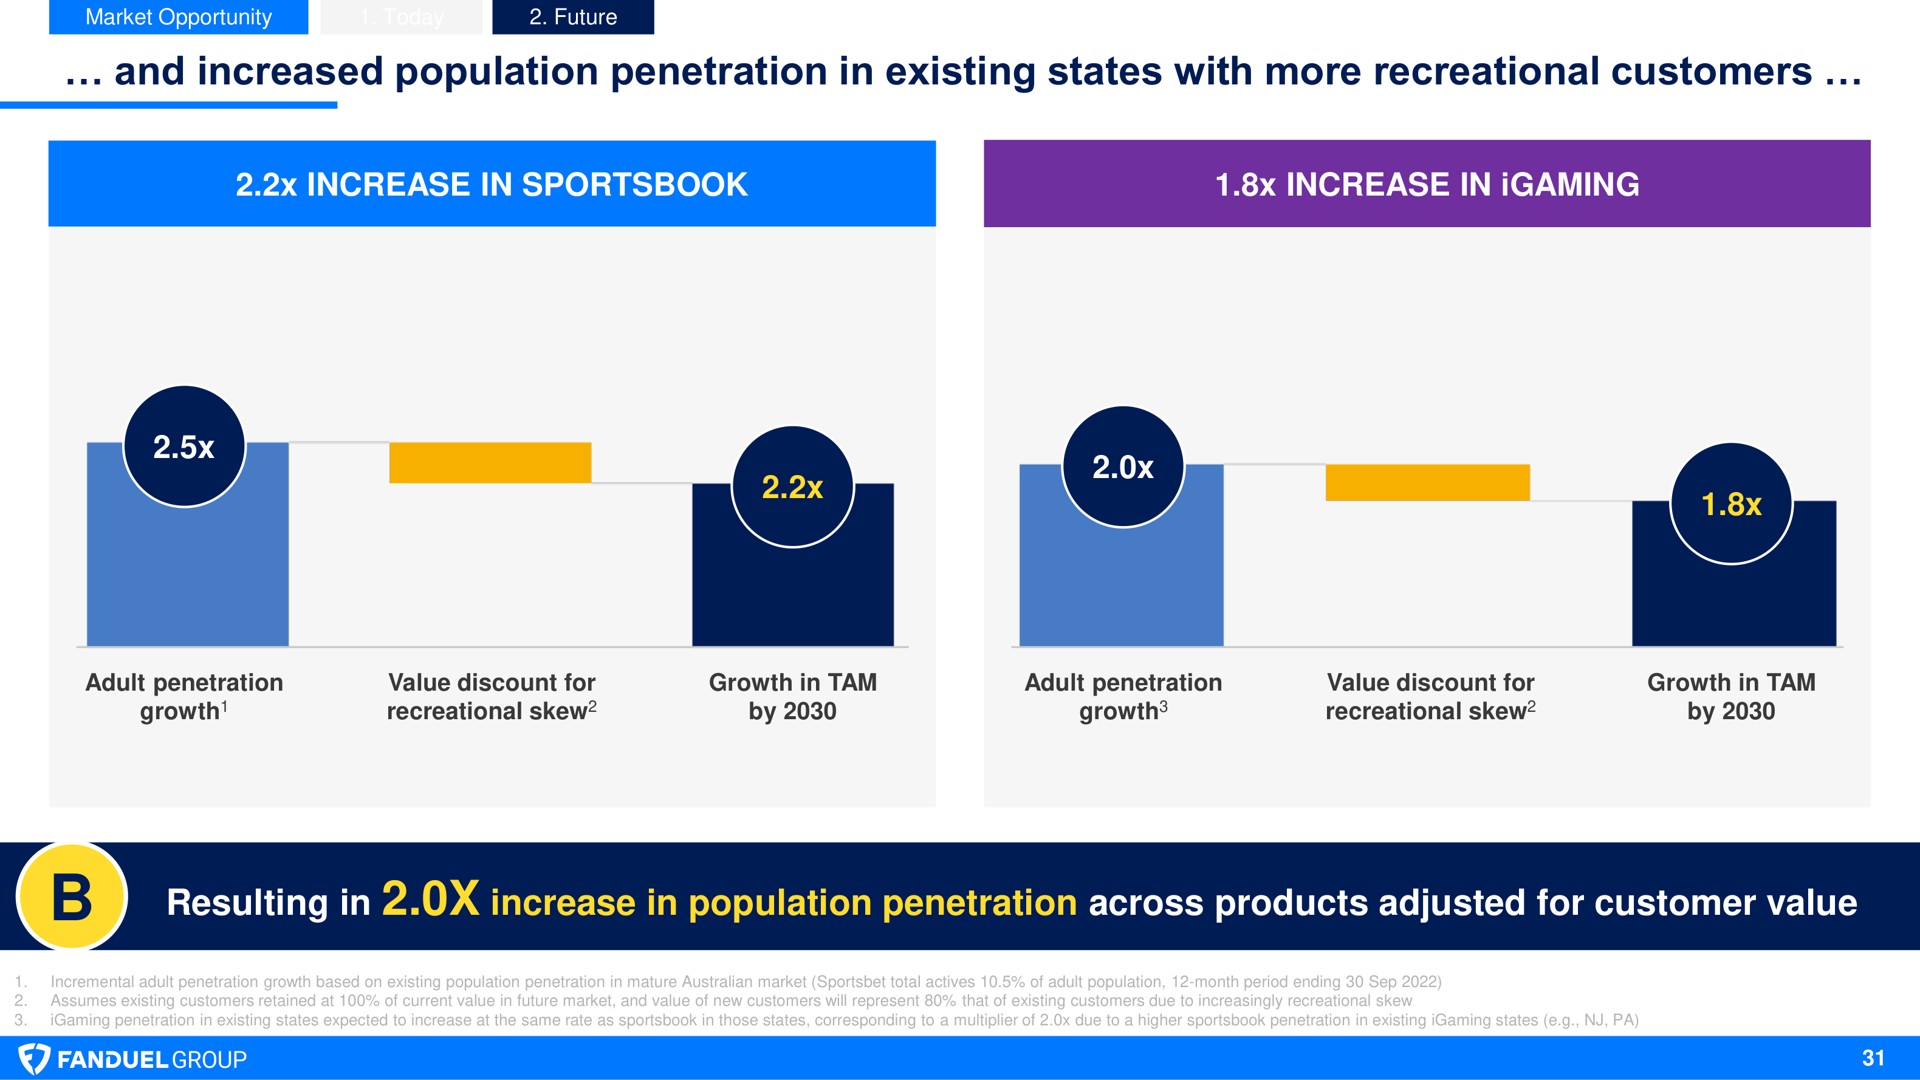 and increased population penetration in existing states with more recreational customers resulting in increase in population penetration across products adjusted for customer value | Flutter